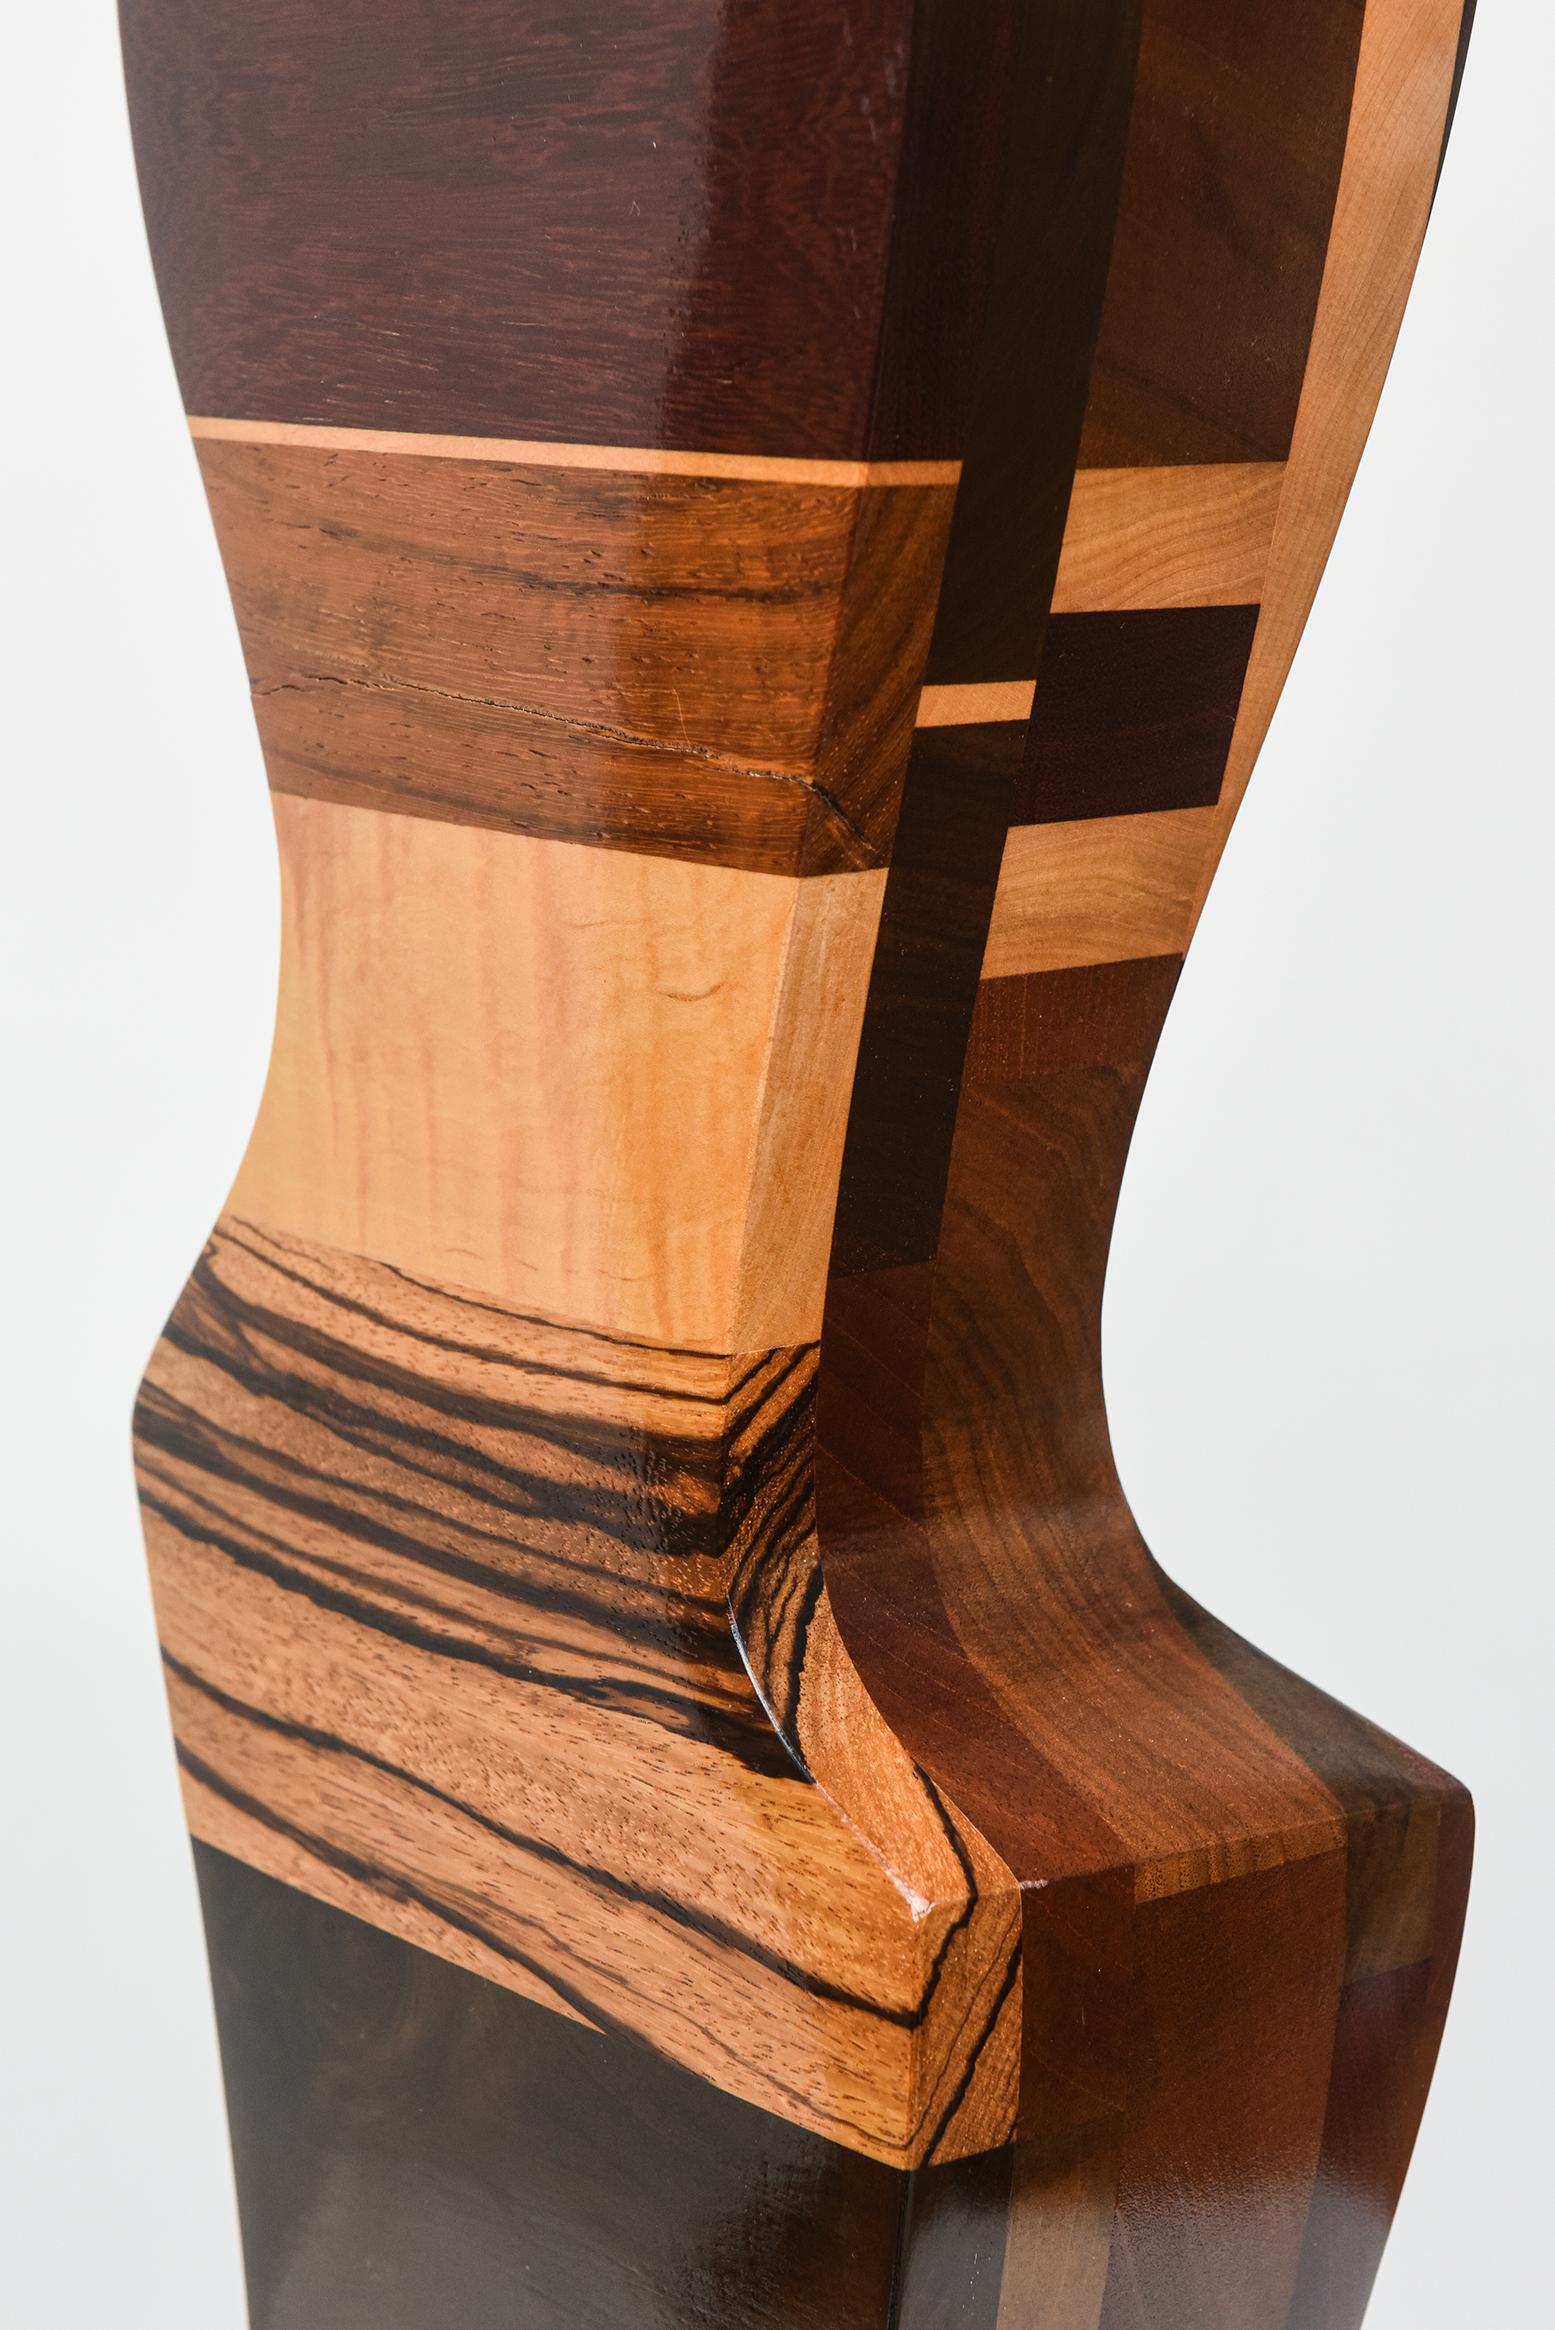 Two Modern Abstract Mixed Wood Studio Sculptures by Paul LaMontagne, C. 1980 For Sale 7